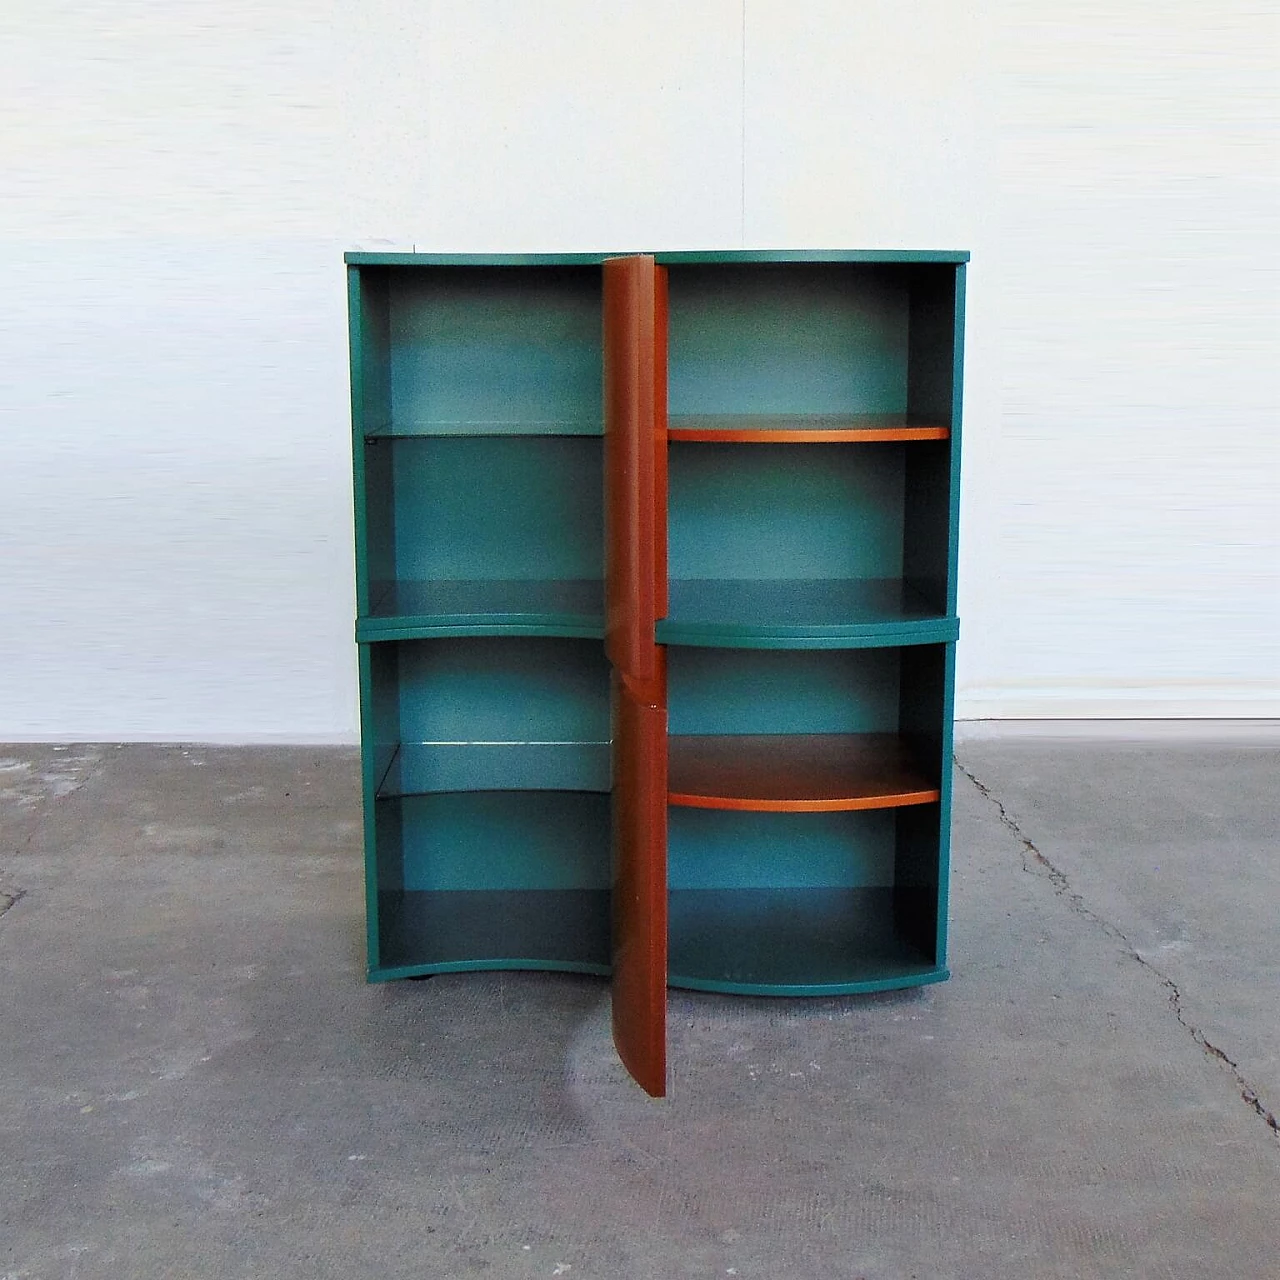 Sideboard Green Satin Lacquer, Doors in Walnut-Stained Cherry, for Roche Bobois, 1990s 1167297